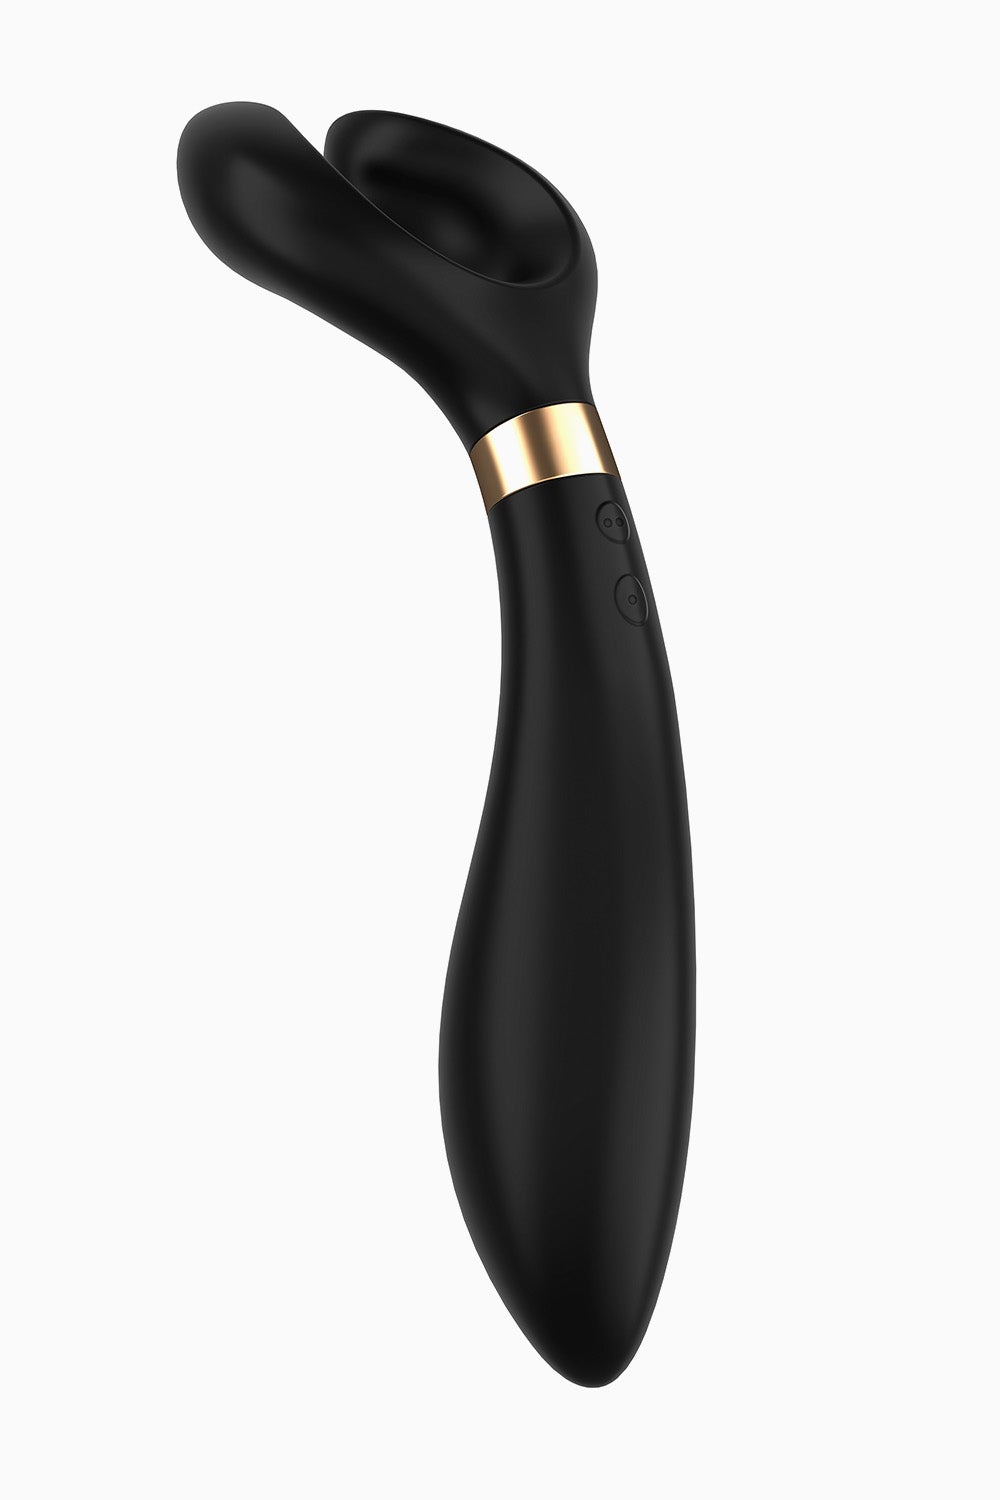 Satisfyer Endless Fun Rechargeable Multi Vibrator Black, 7.5 Inches